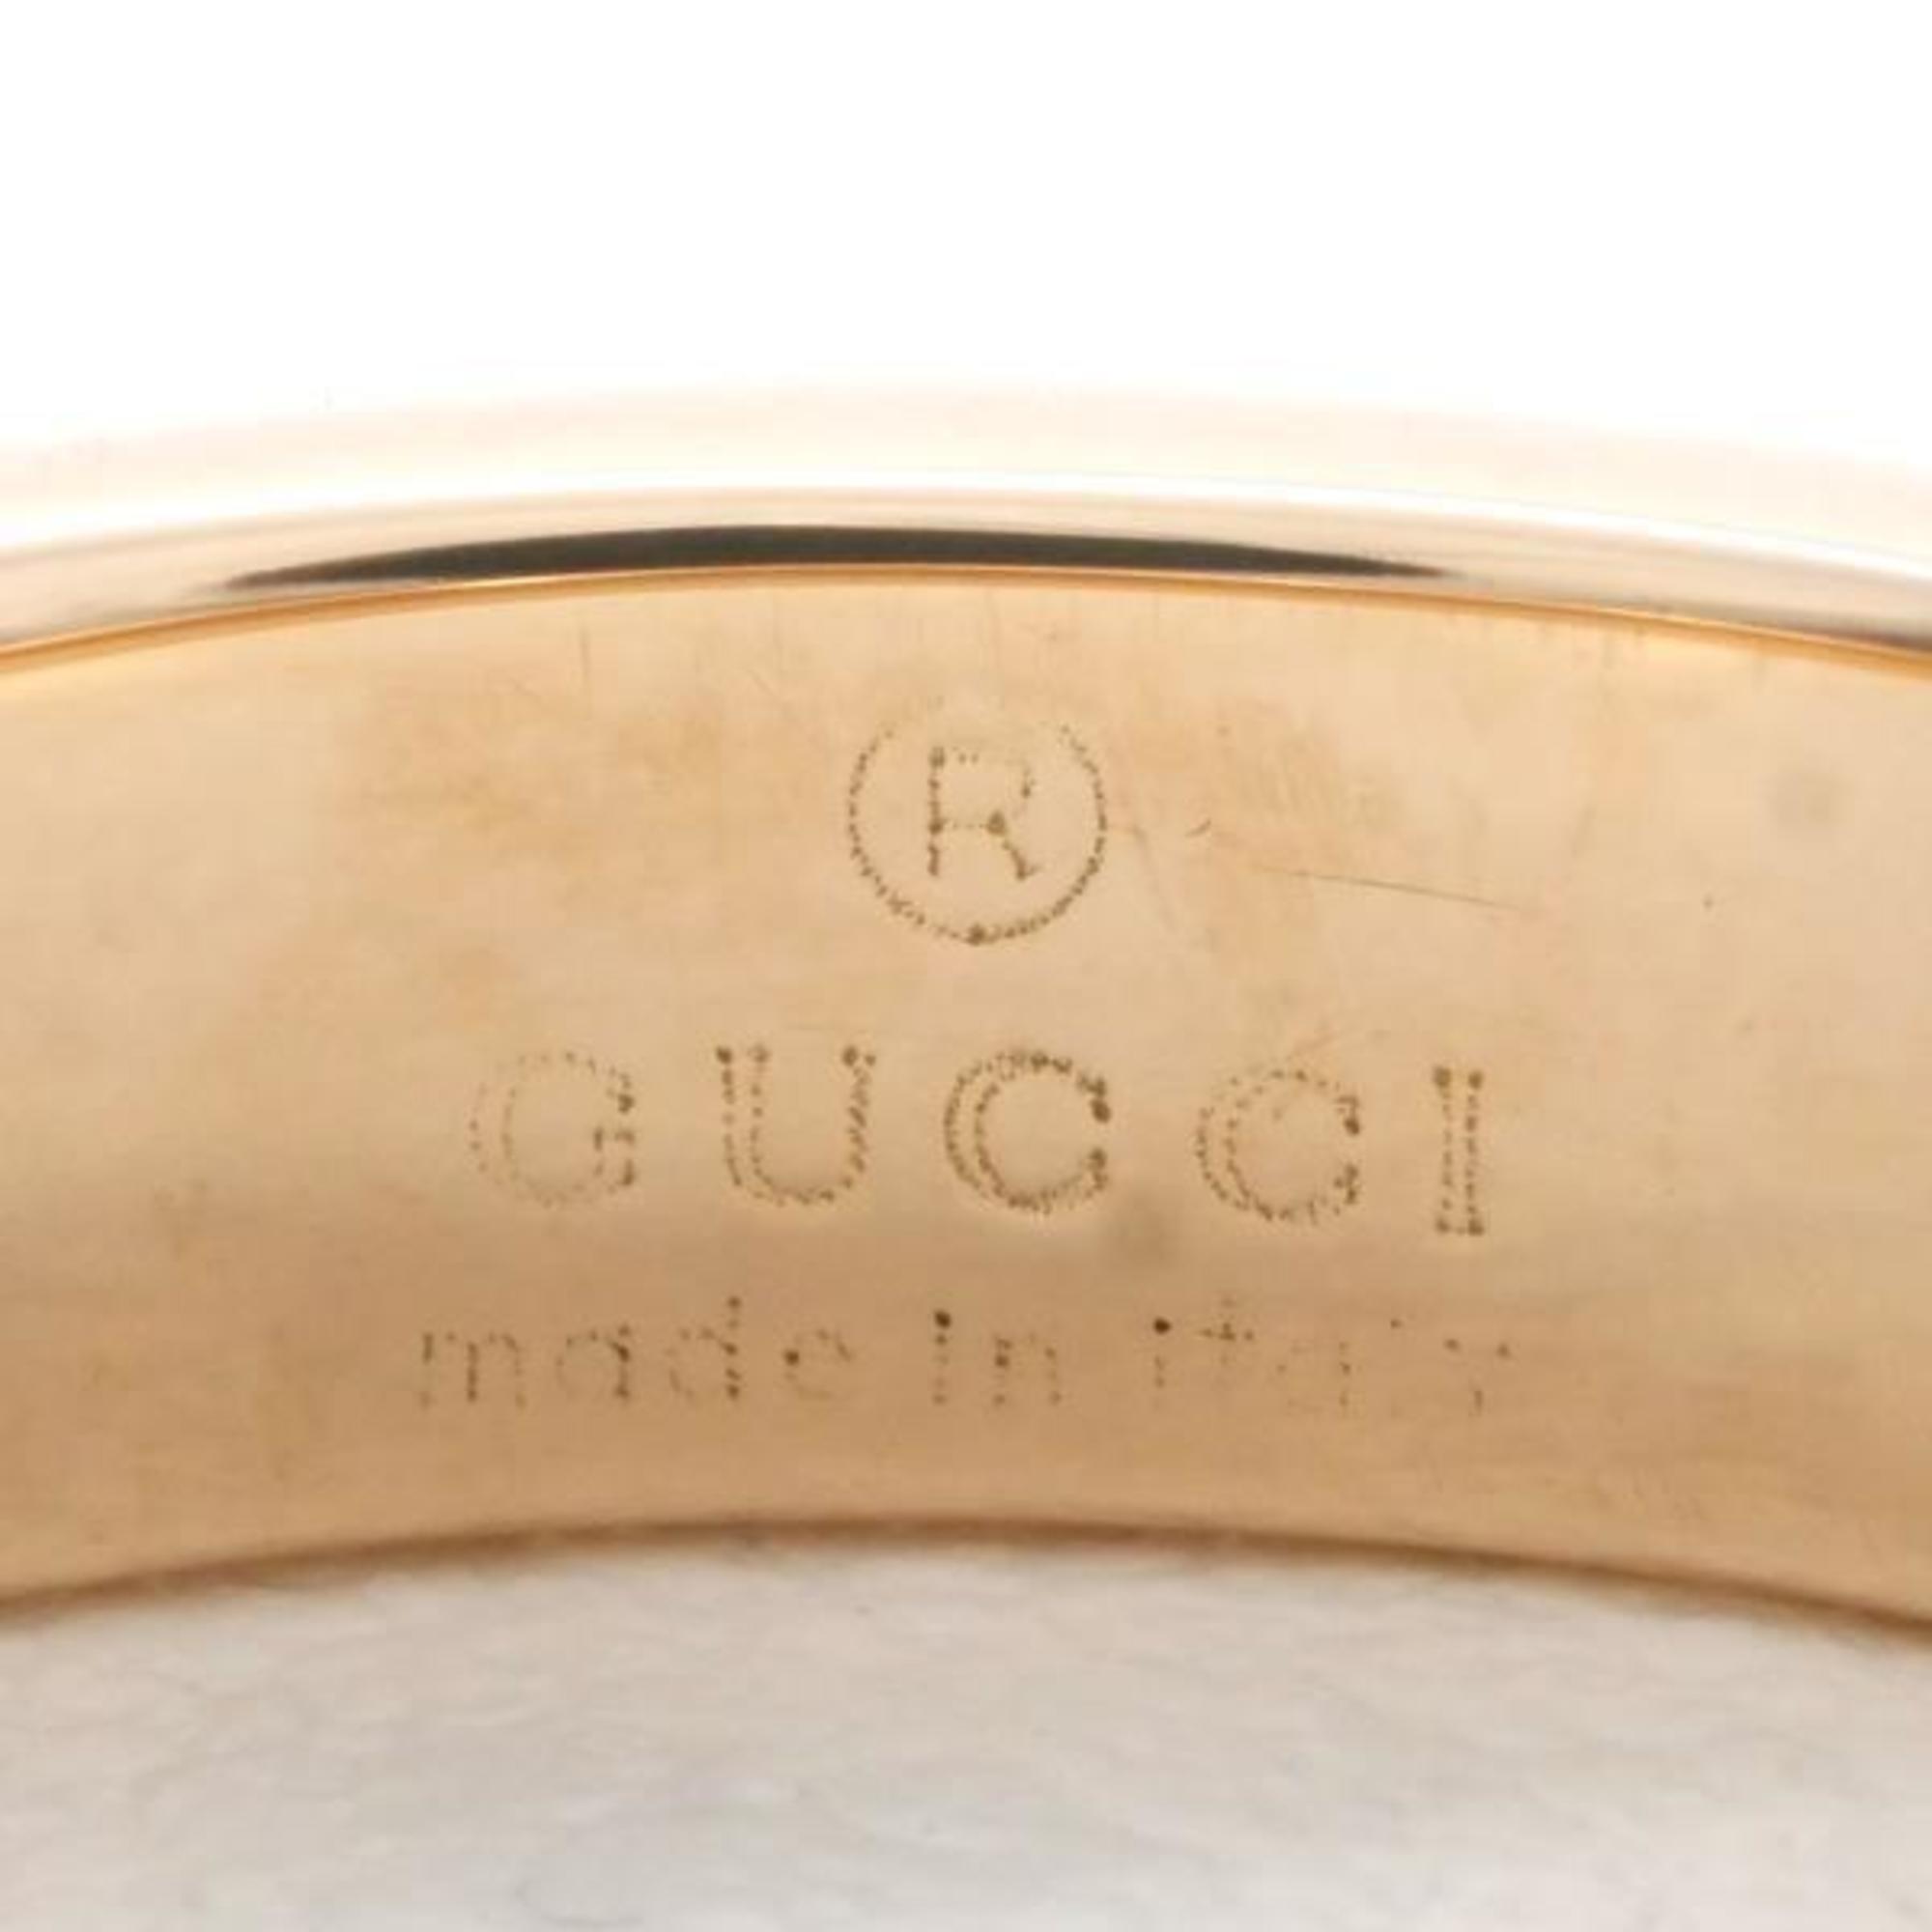 Gucci Icon K18PG Ring Size 7.5 Total Weight Approx. 3.2g Jewelry Wrapping Free